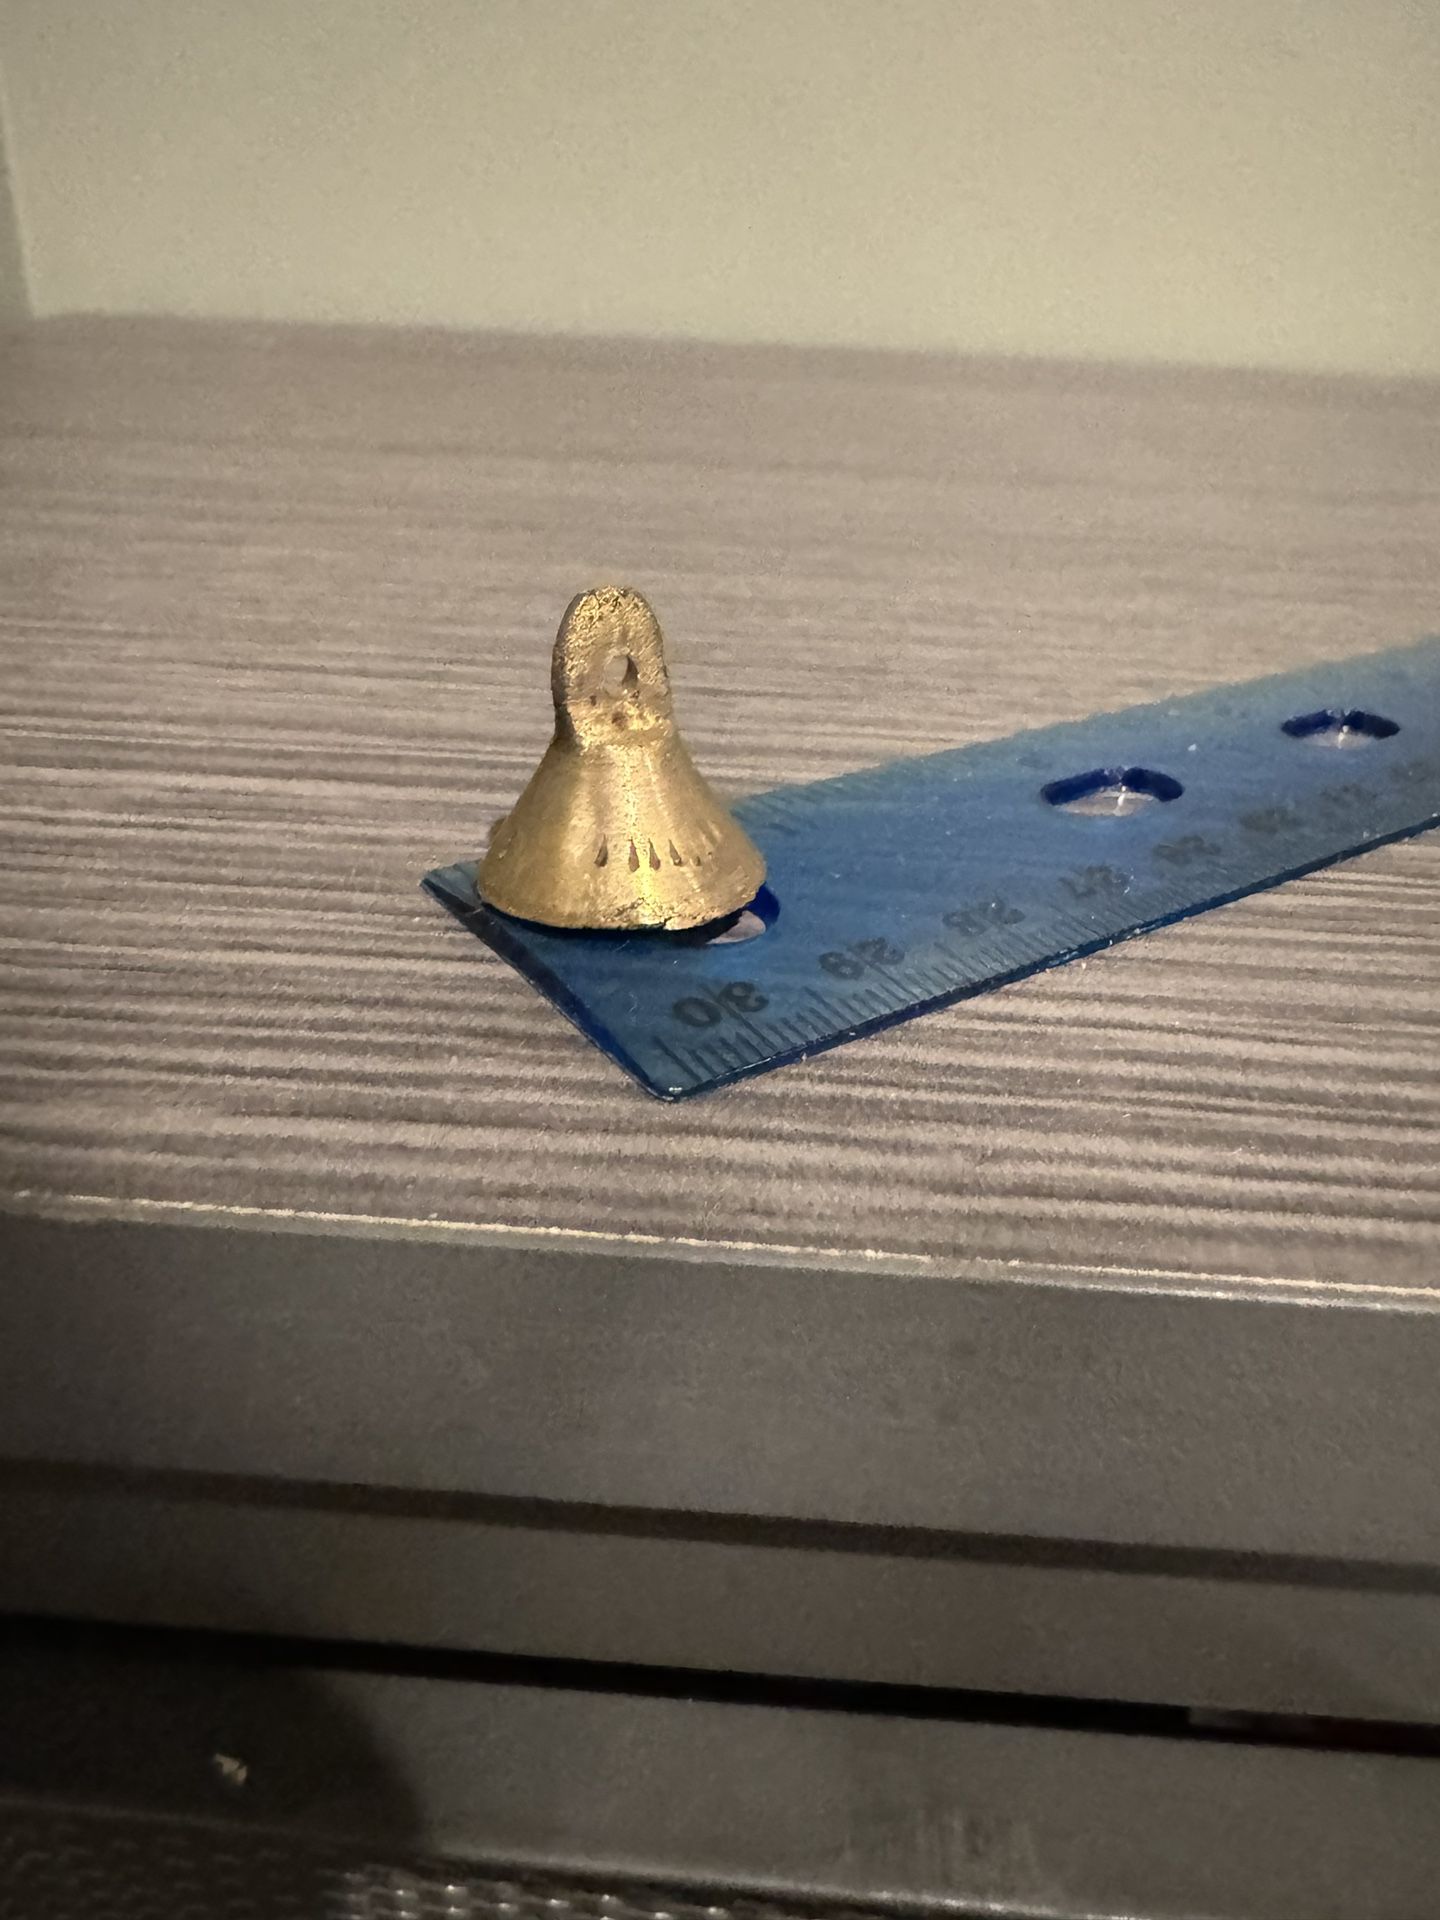 Vintage Miniature Brass Bell: A Tiny Echo of the Past